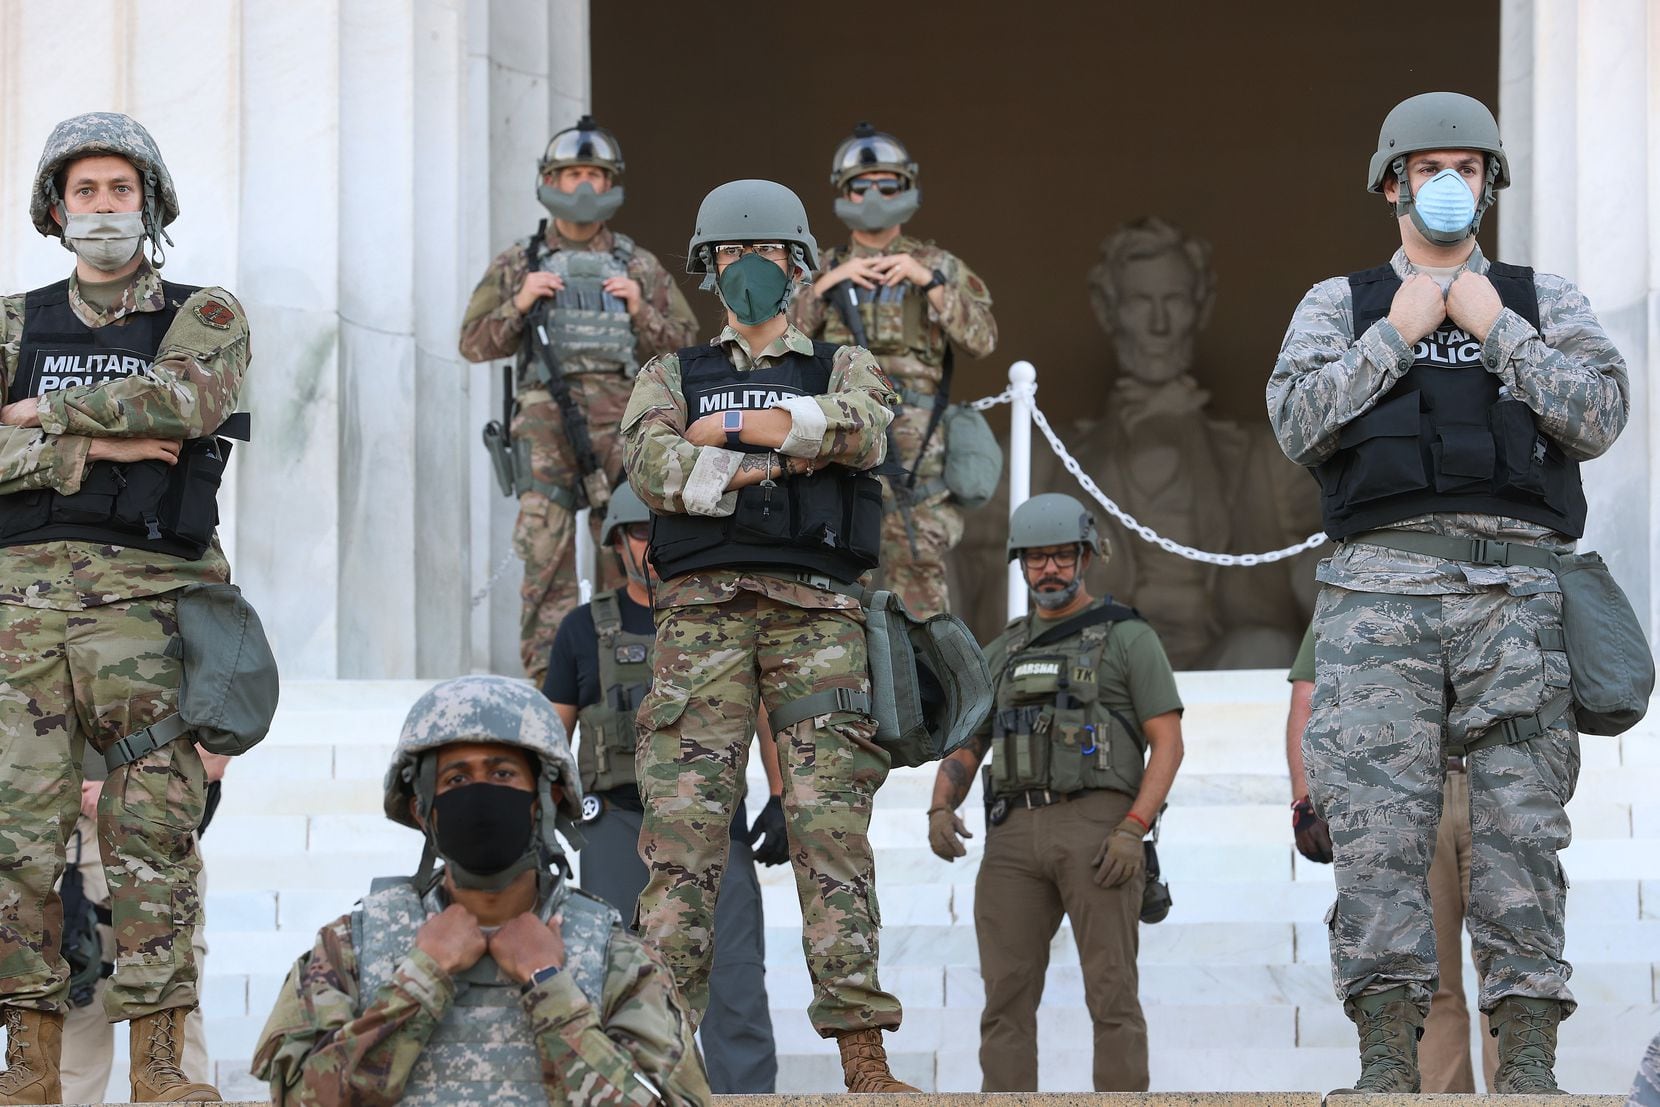 Members of the D.C. National Guard stand on the steps of the Lincoln Memorial monitoring a...